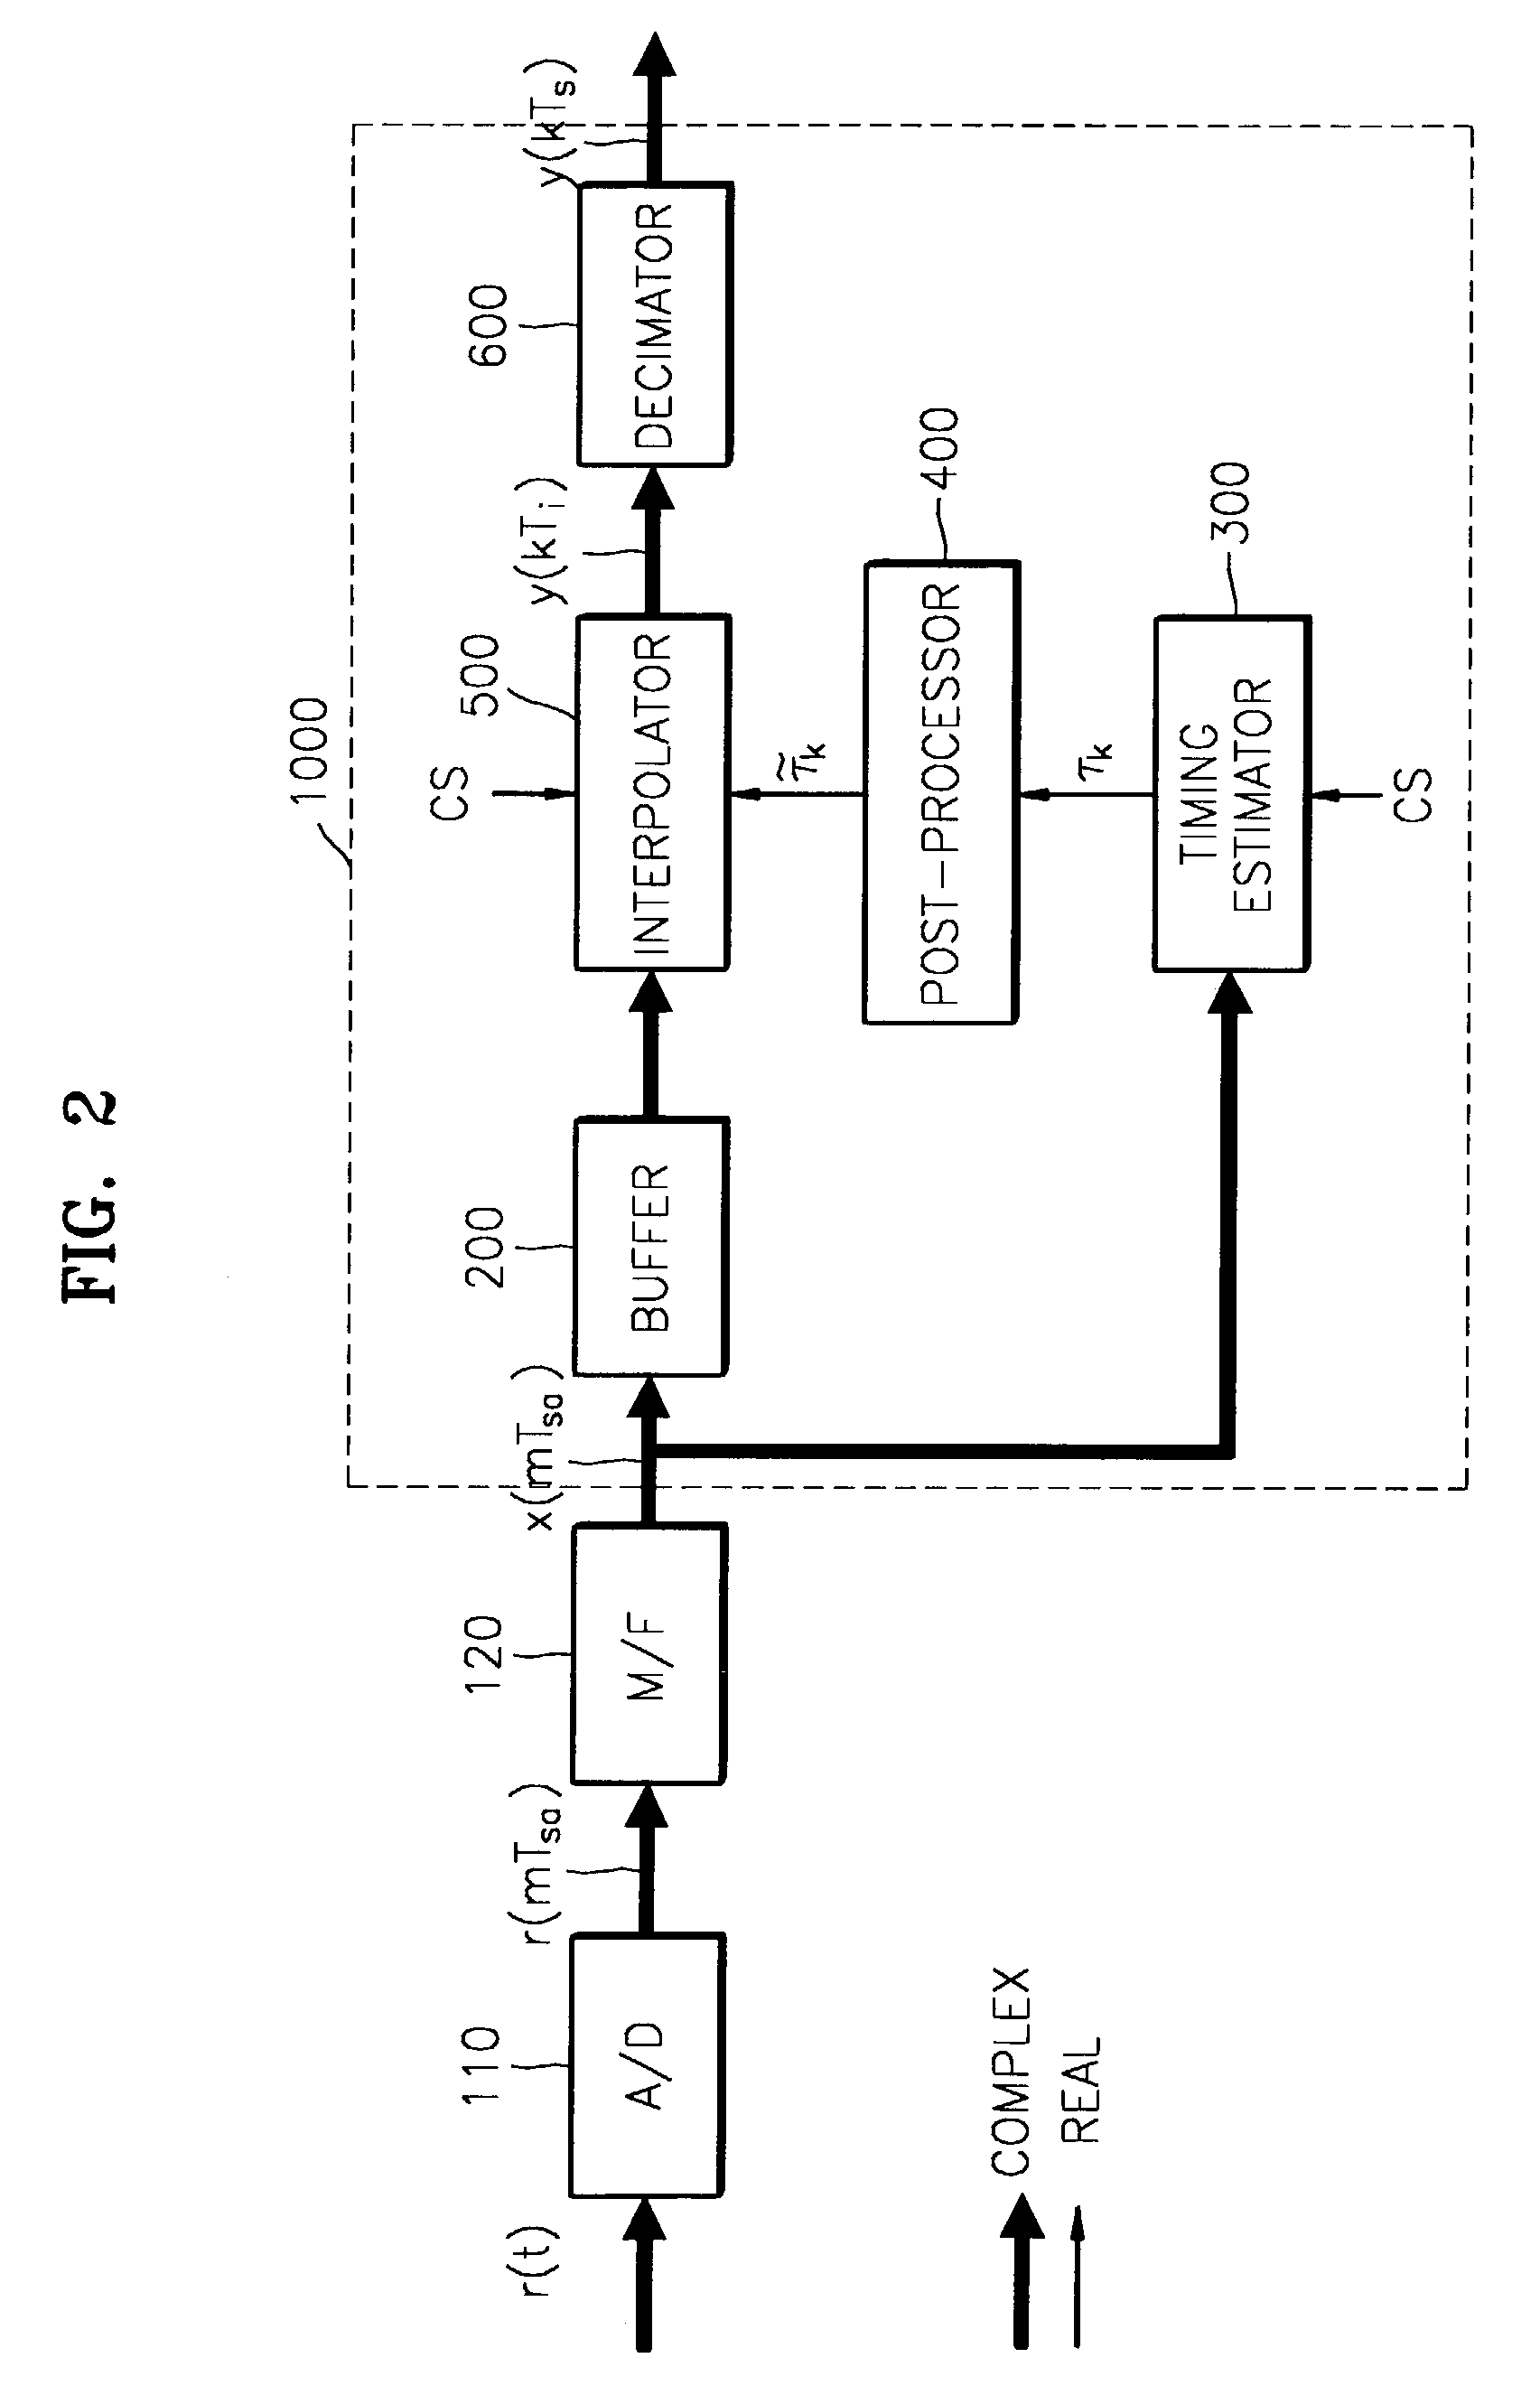 Robust symbol timing recovery circuit for telephone line modem